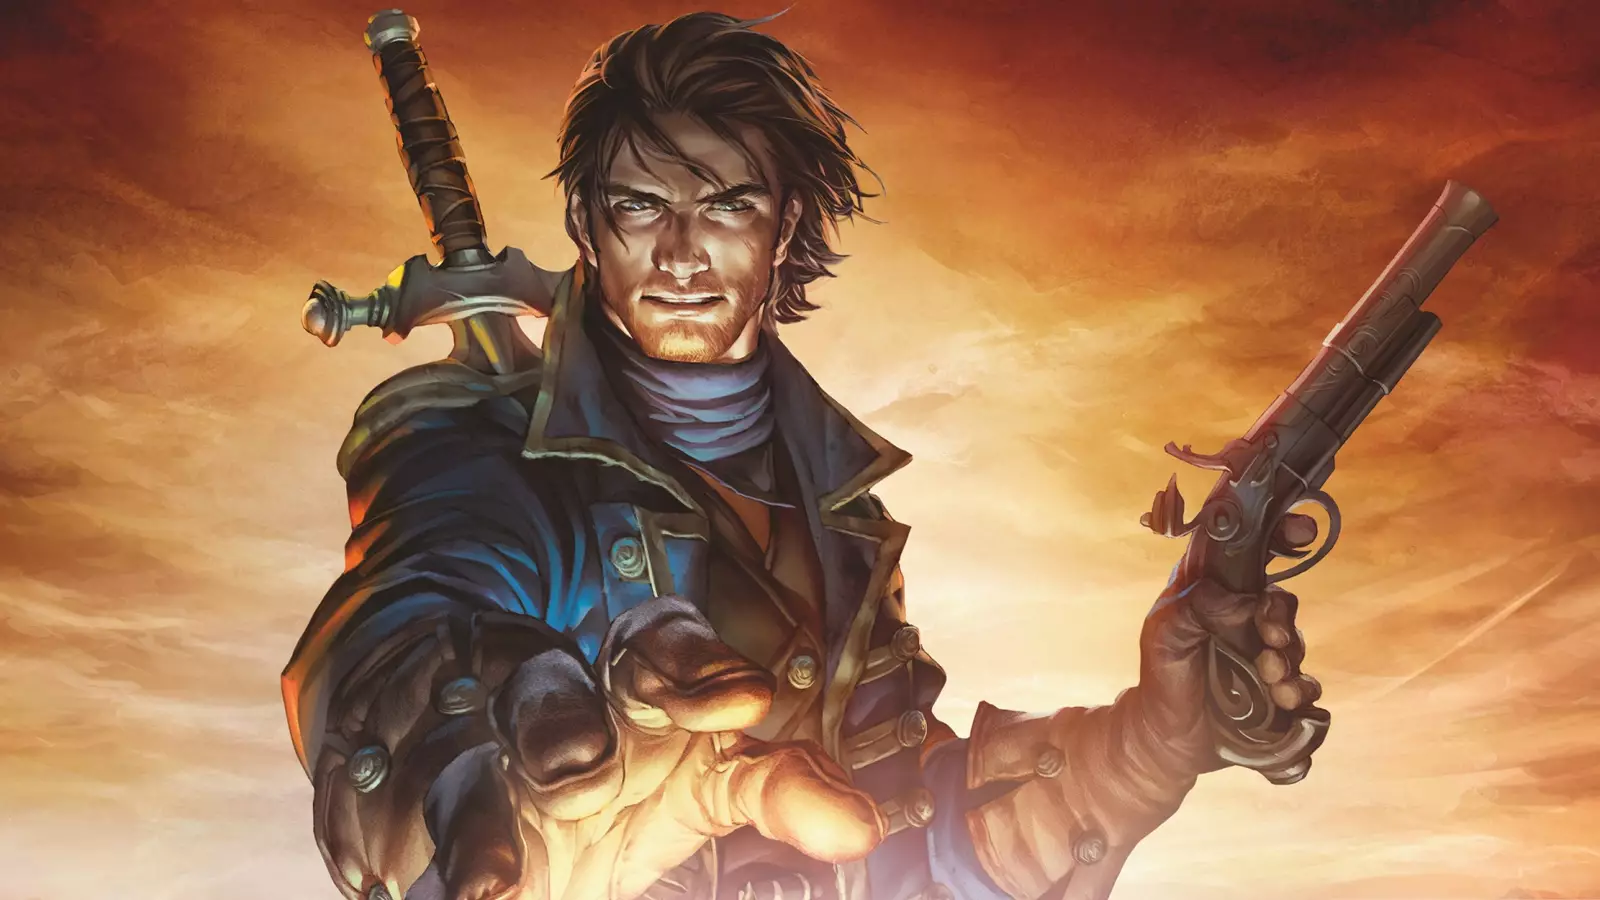 The last full-blooded Fable game came out back in 2010